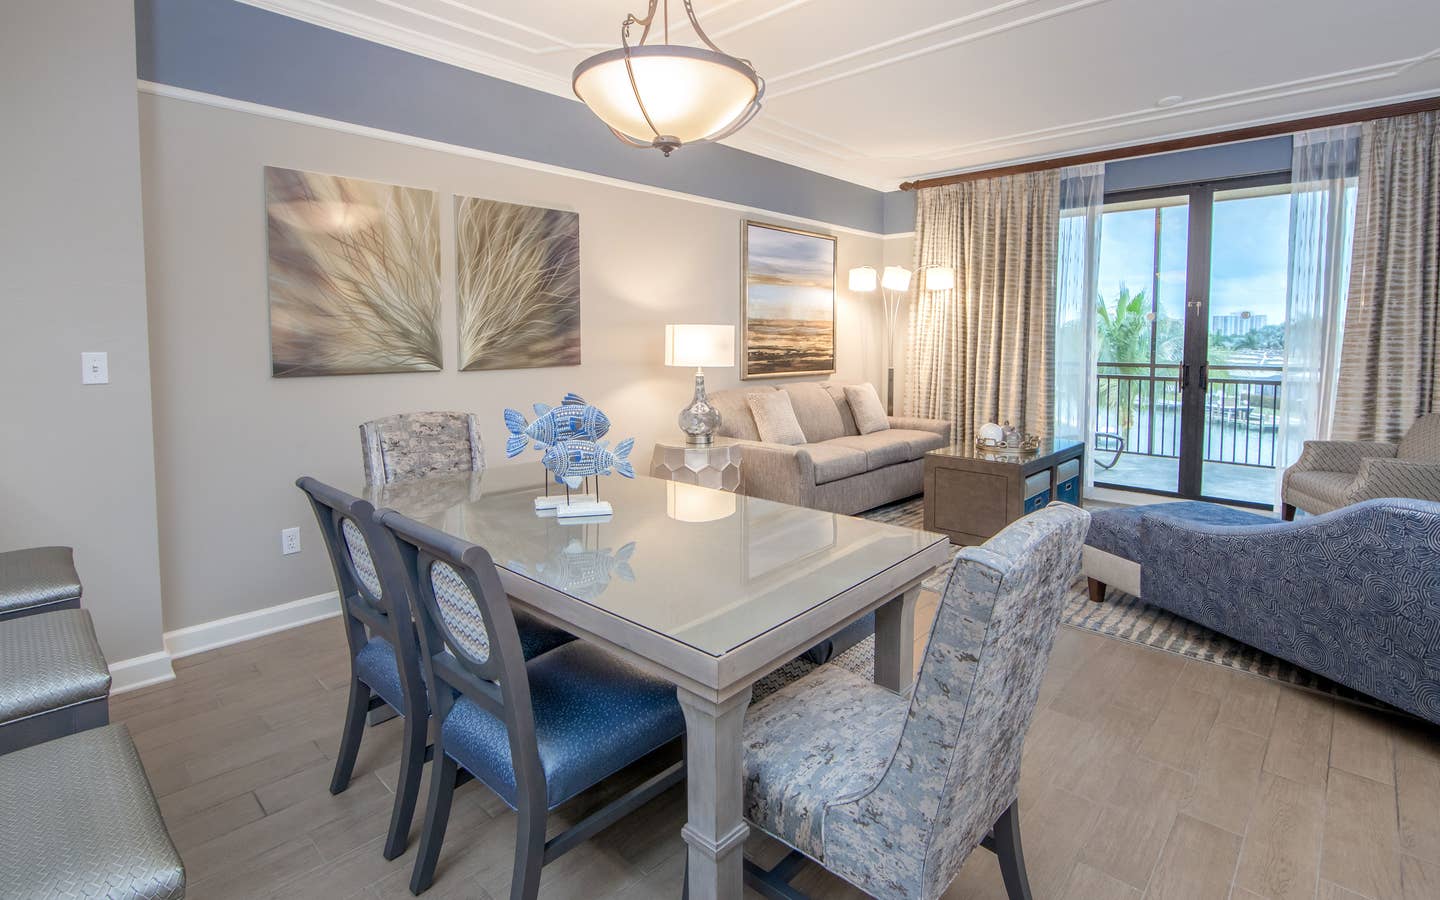 Dining room table with six chairs and coastal decor in a three-bedroom villa at Sunset Cove Resort in Marco Island, Florida